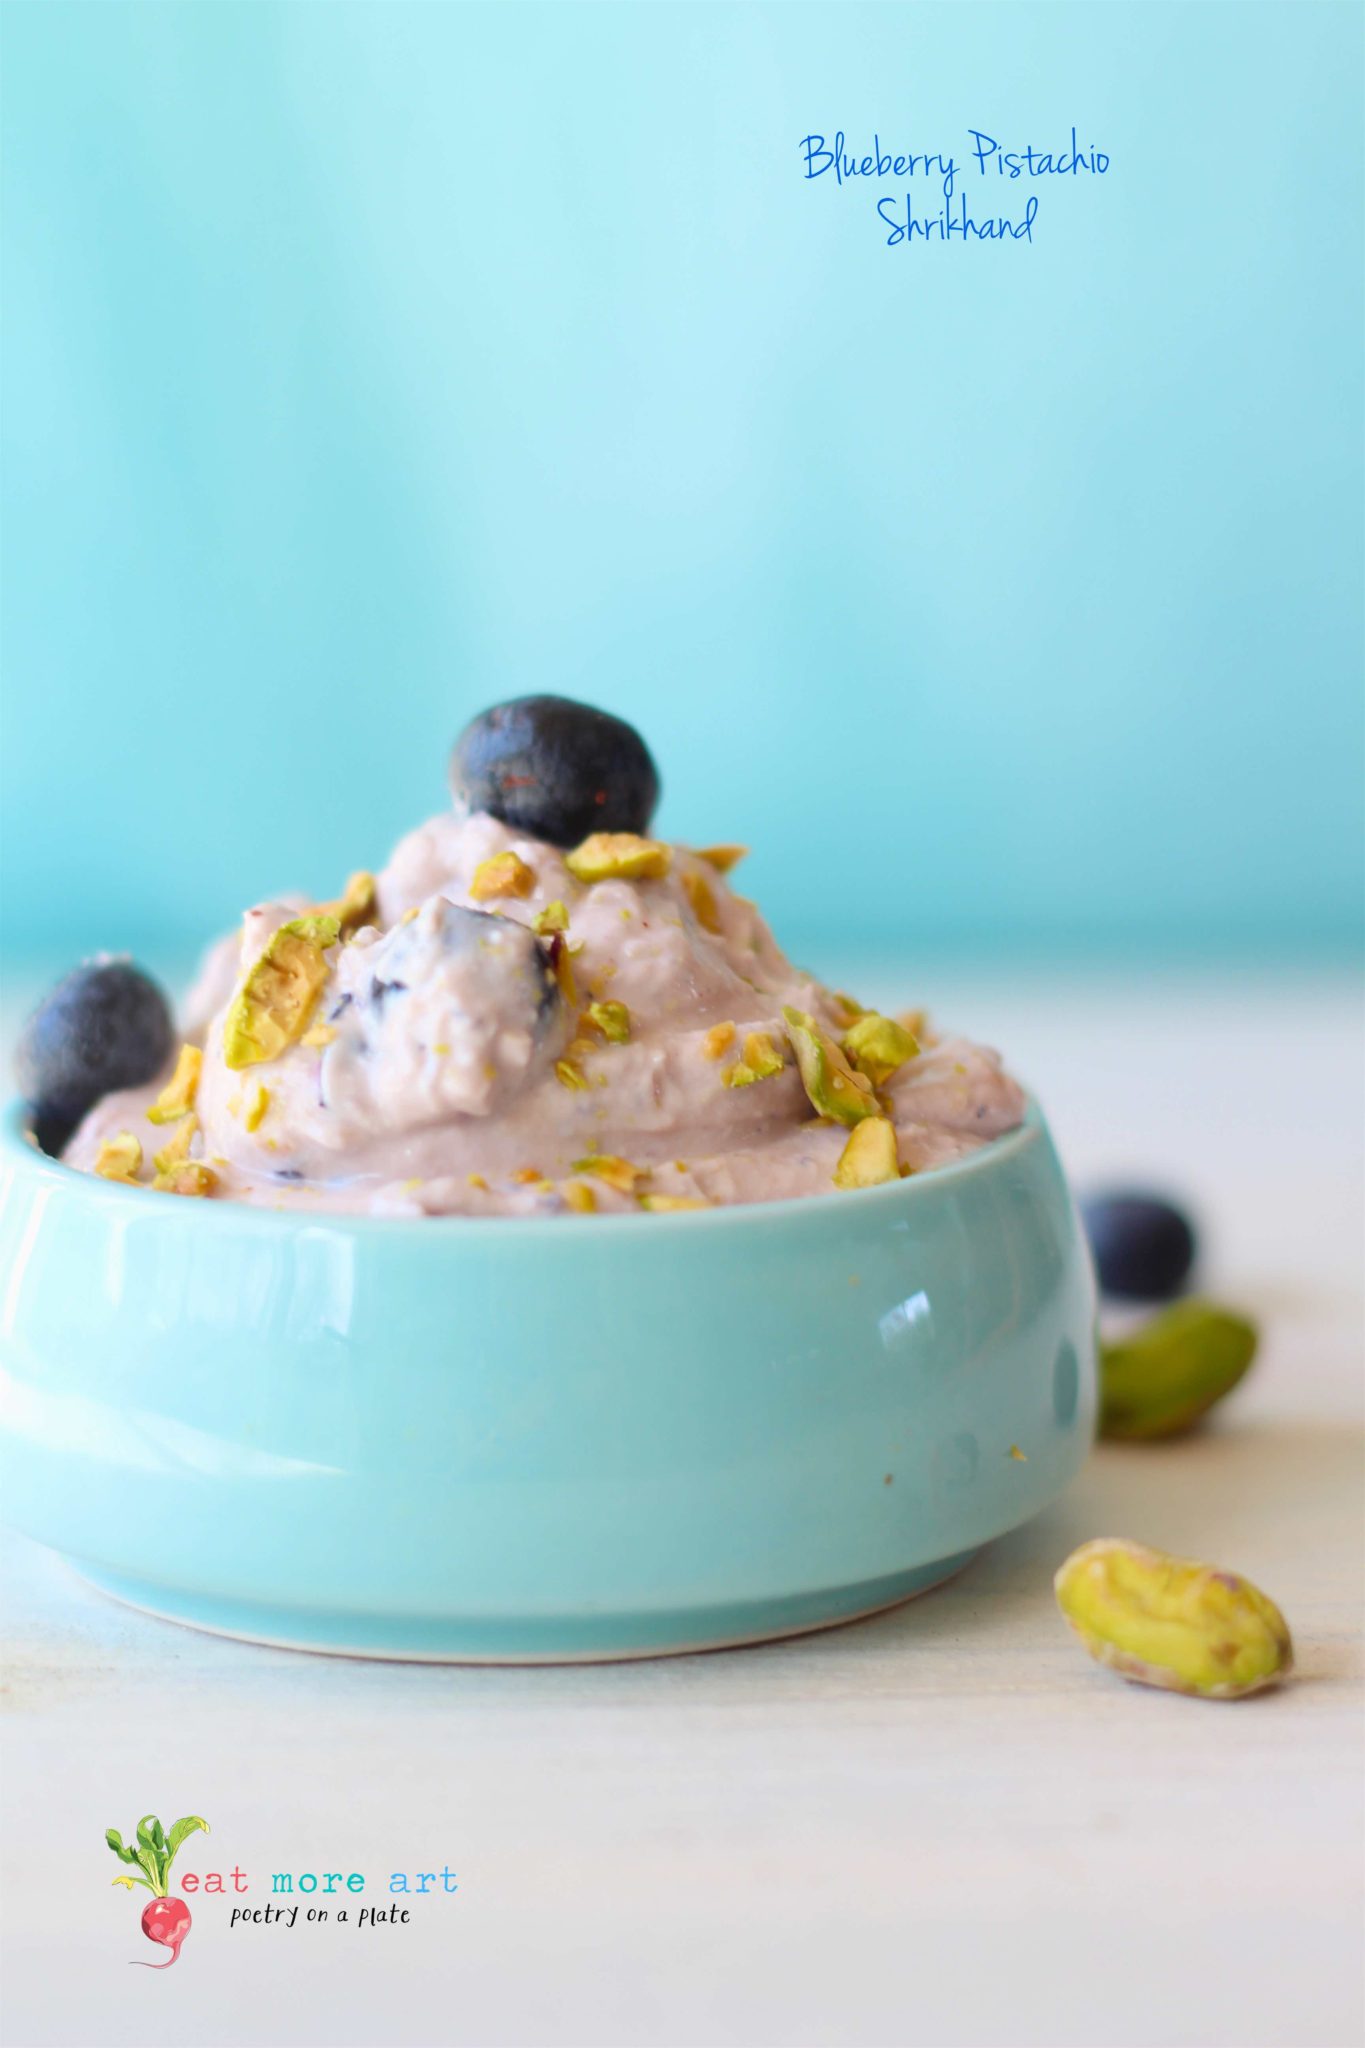 Pistachio Blueberry Shrikhand served in a baby blue bowl on a white backdrop with pistachios and blueberries scattered around